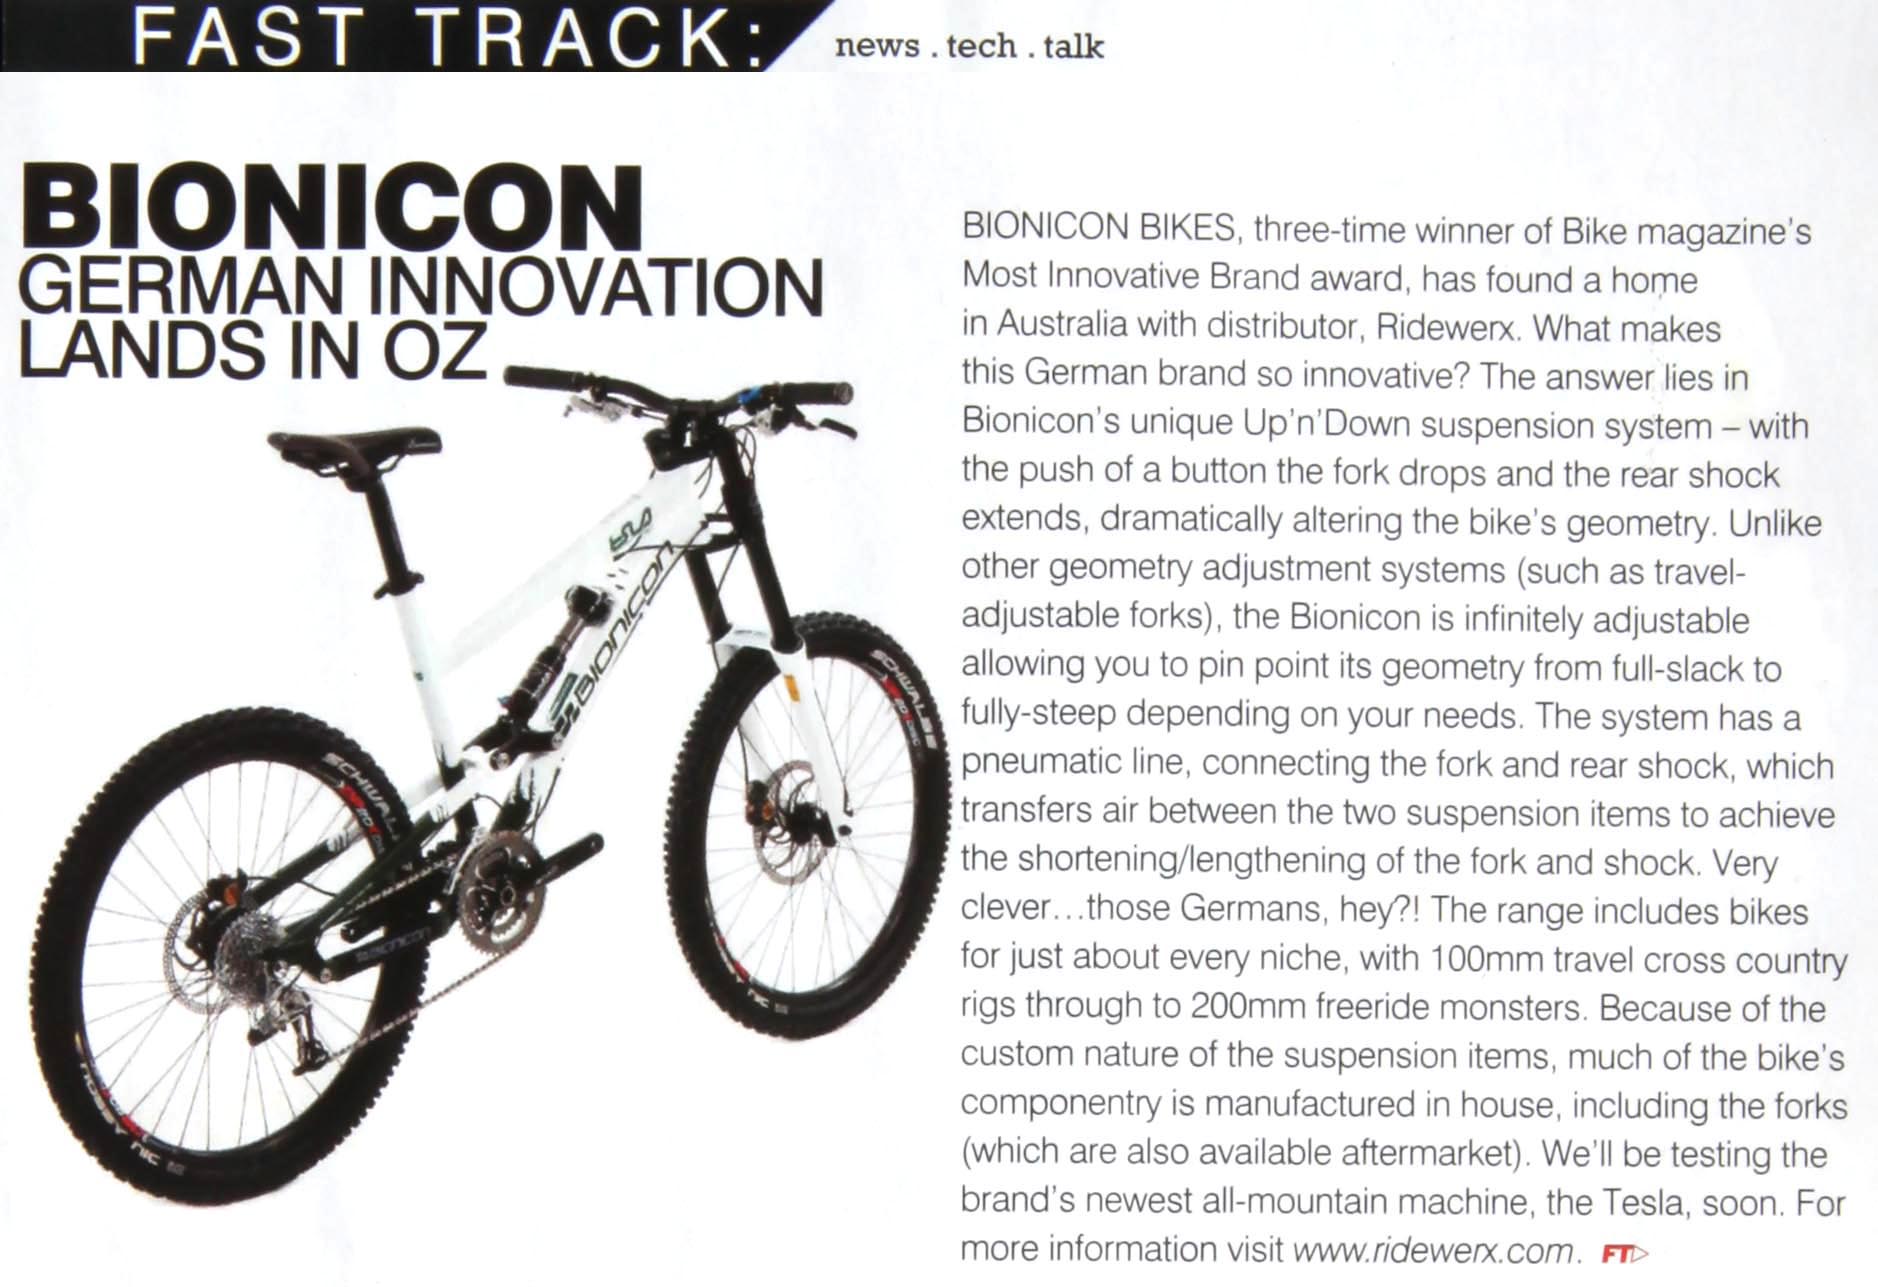 Taken from the May 2010 Edition of Australia Mountain Bike